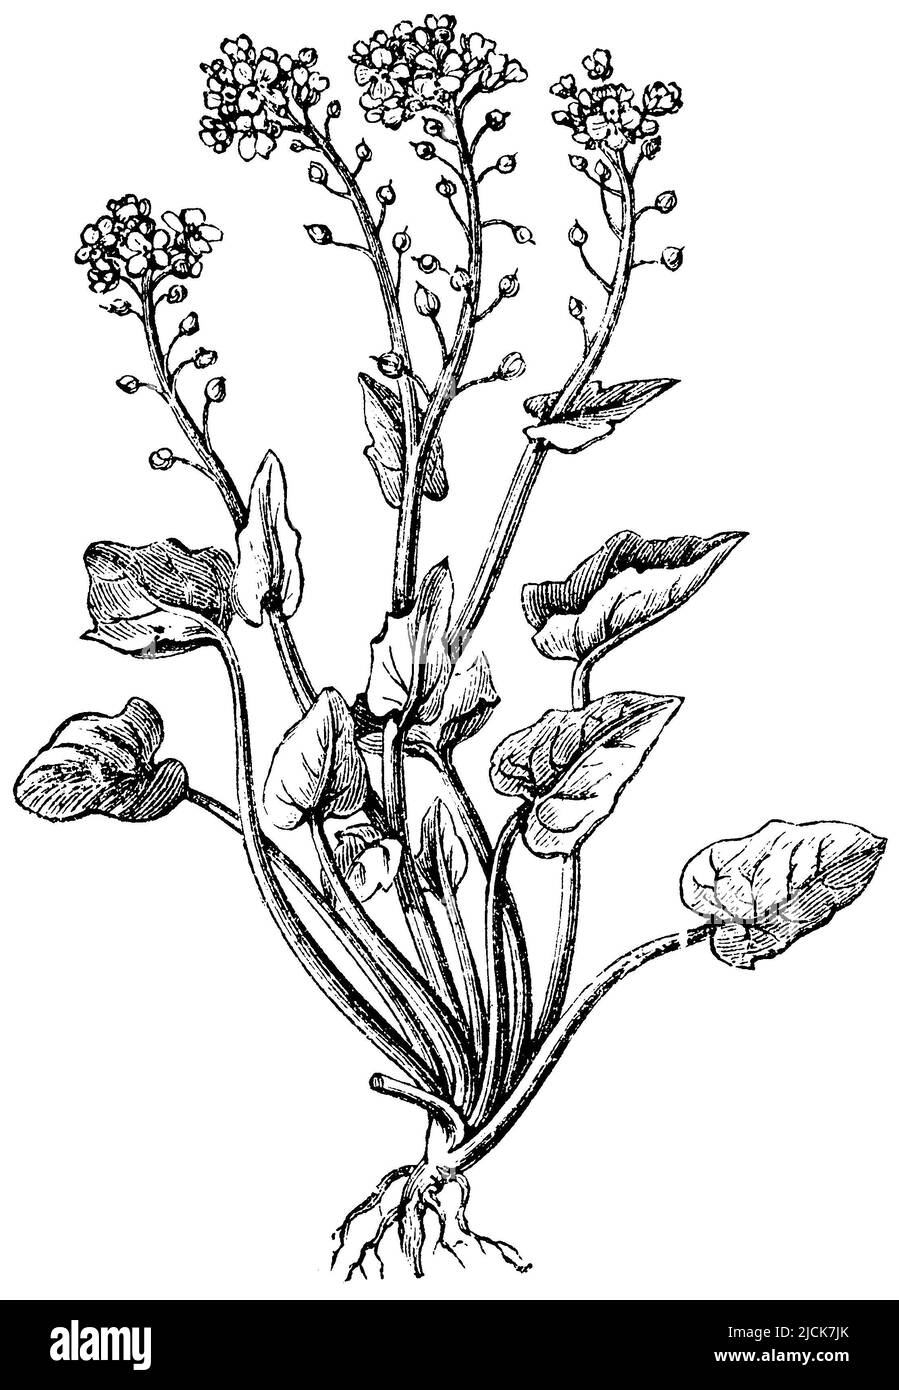 Common Scurvygrass, Cochlearia officinalis, anonym (agricultural book, 1876), Echtes Löffelkraut, Cranson Officinal Stock Photo